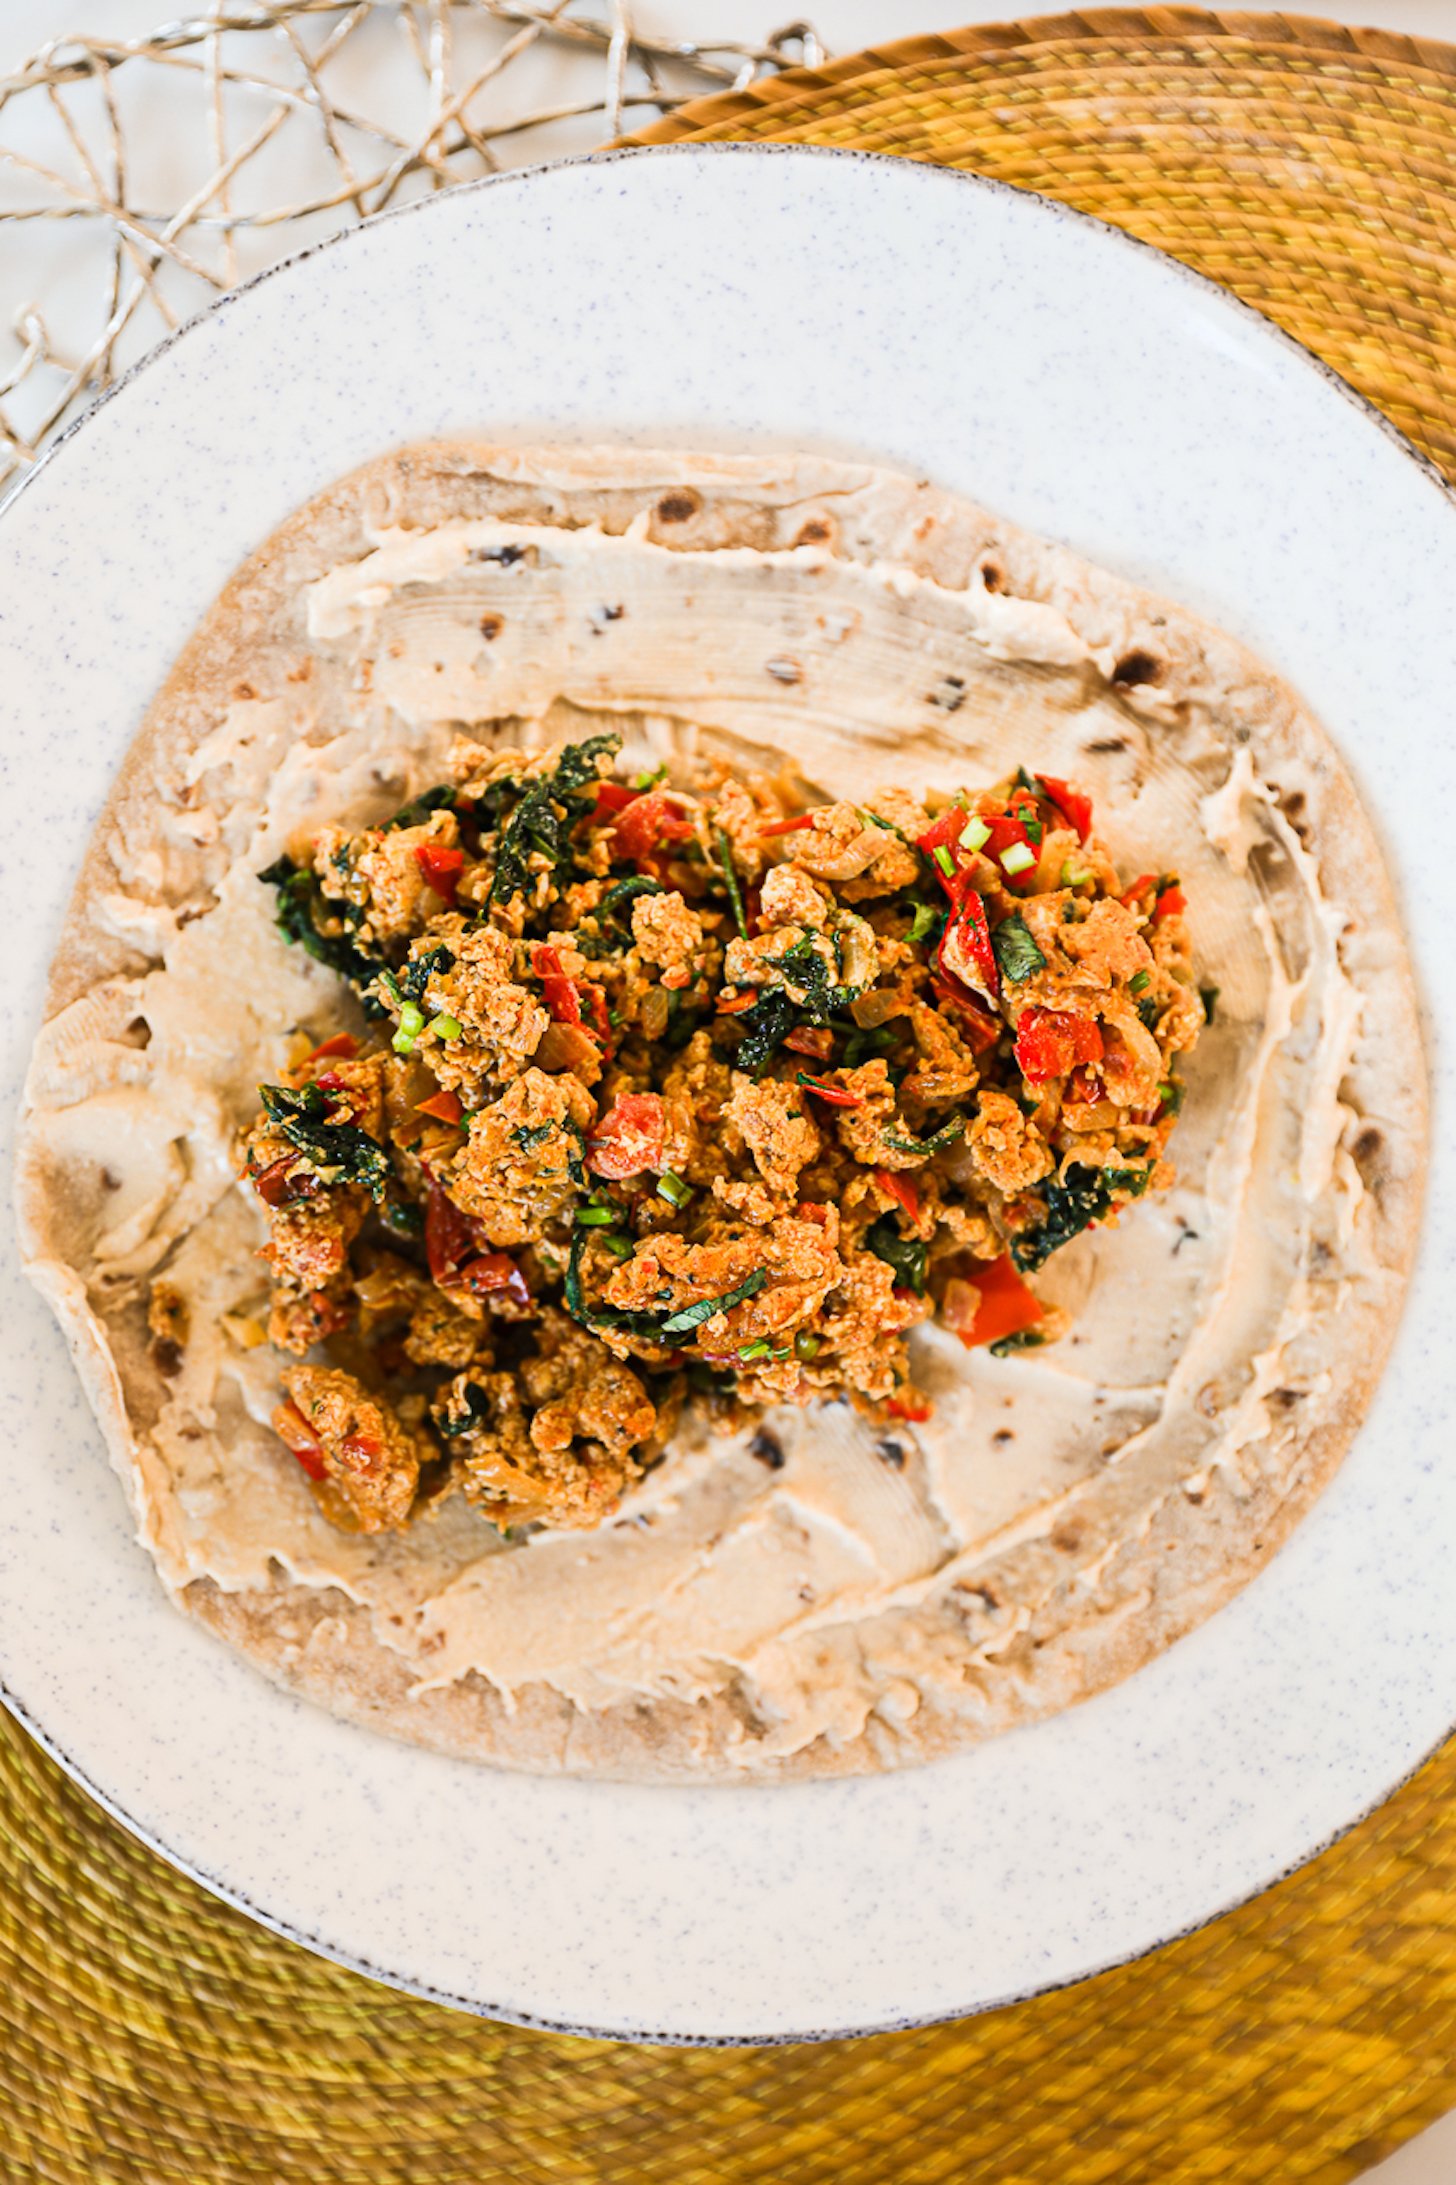 Overhead view of roti coated with hummus and a pile of egg bhurji.